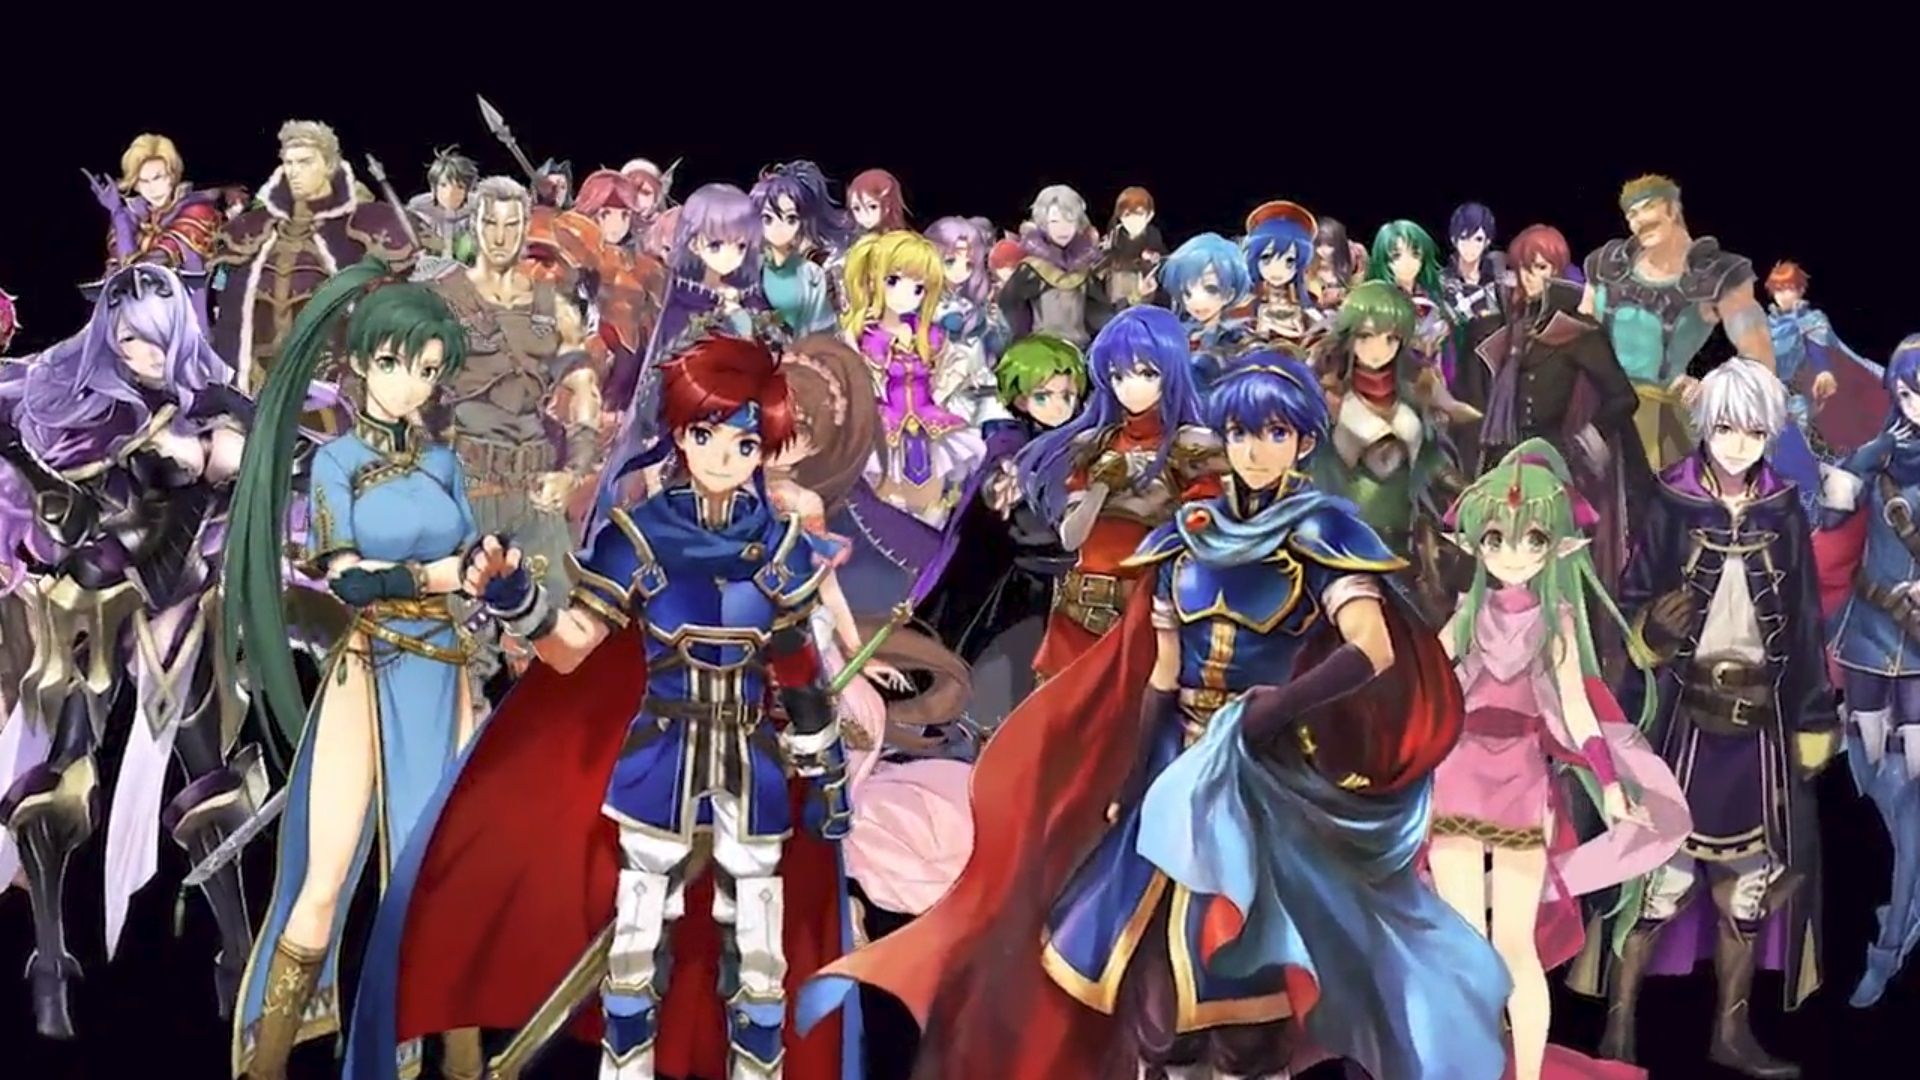 Fire Emblem Heroes Made $300 Million In Its First Year